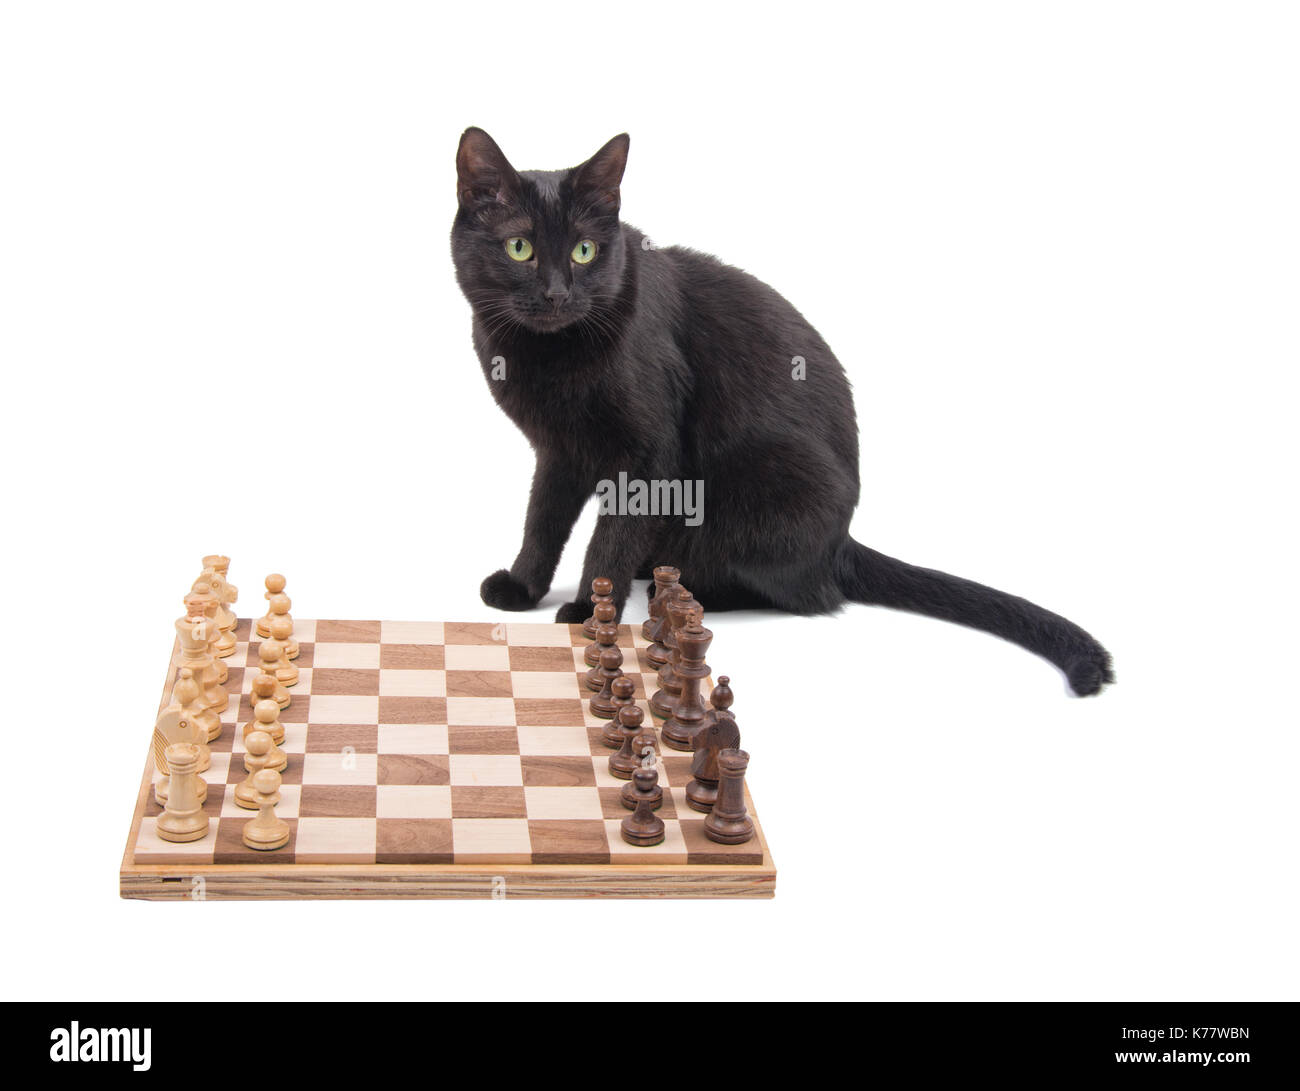 Black cat sitting behind a chessboard, on white Stock Photo